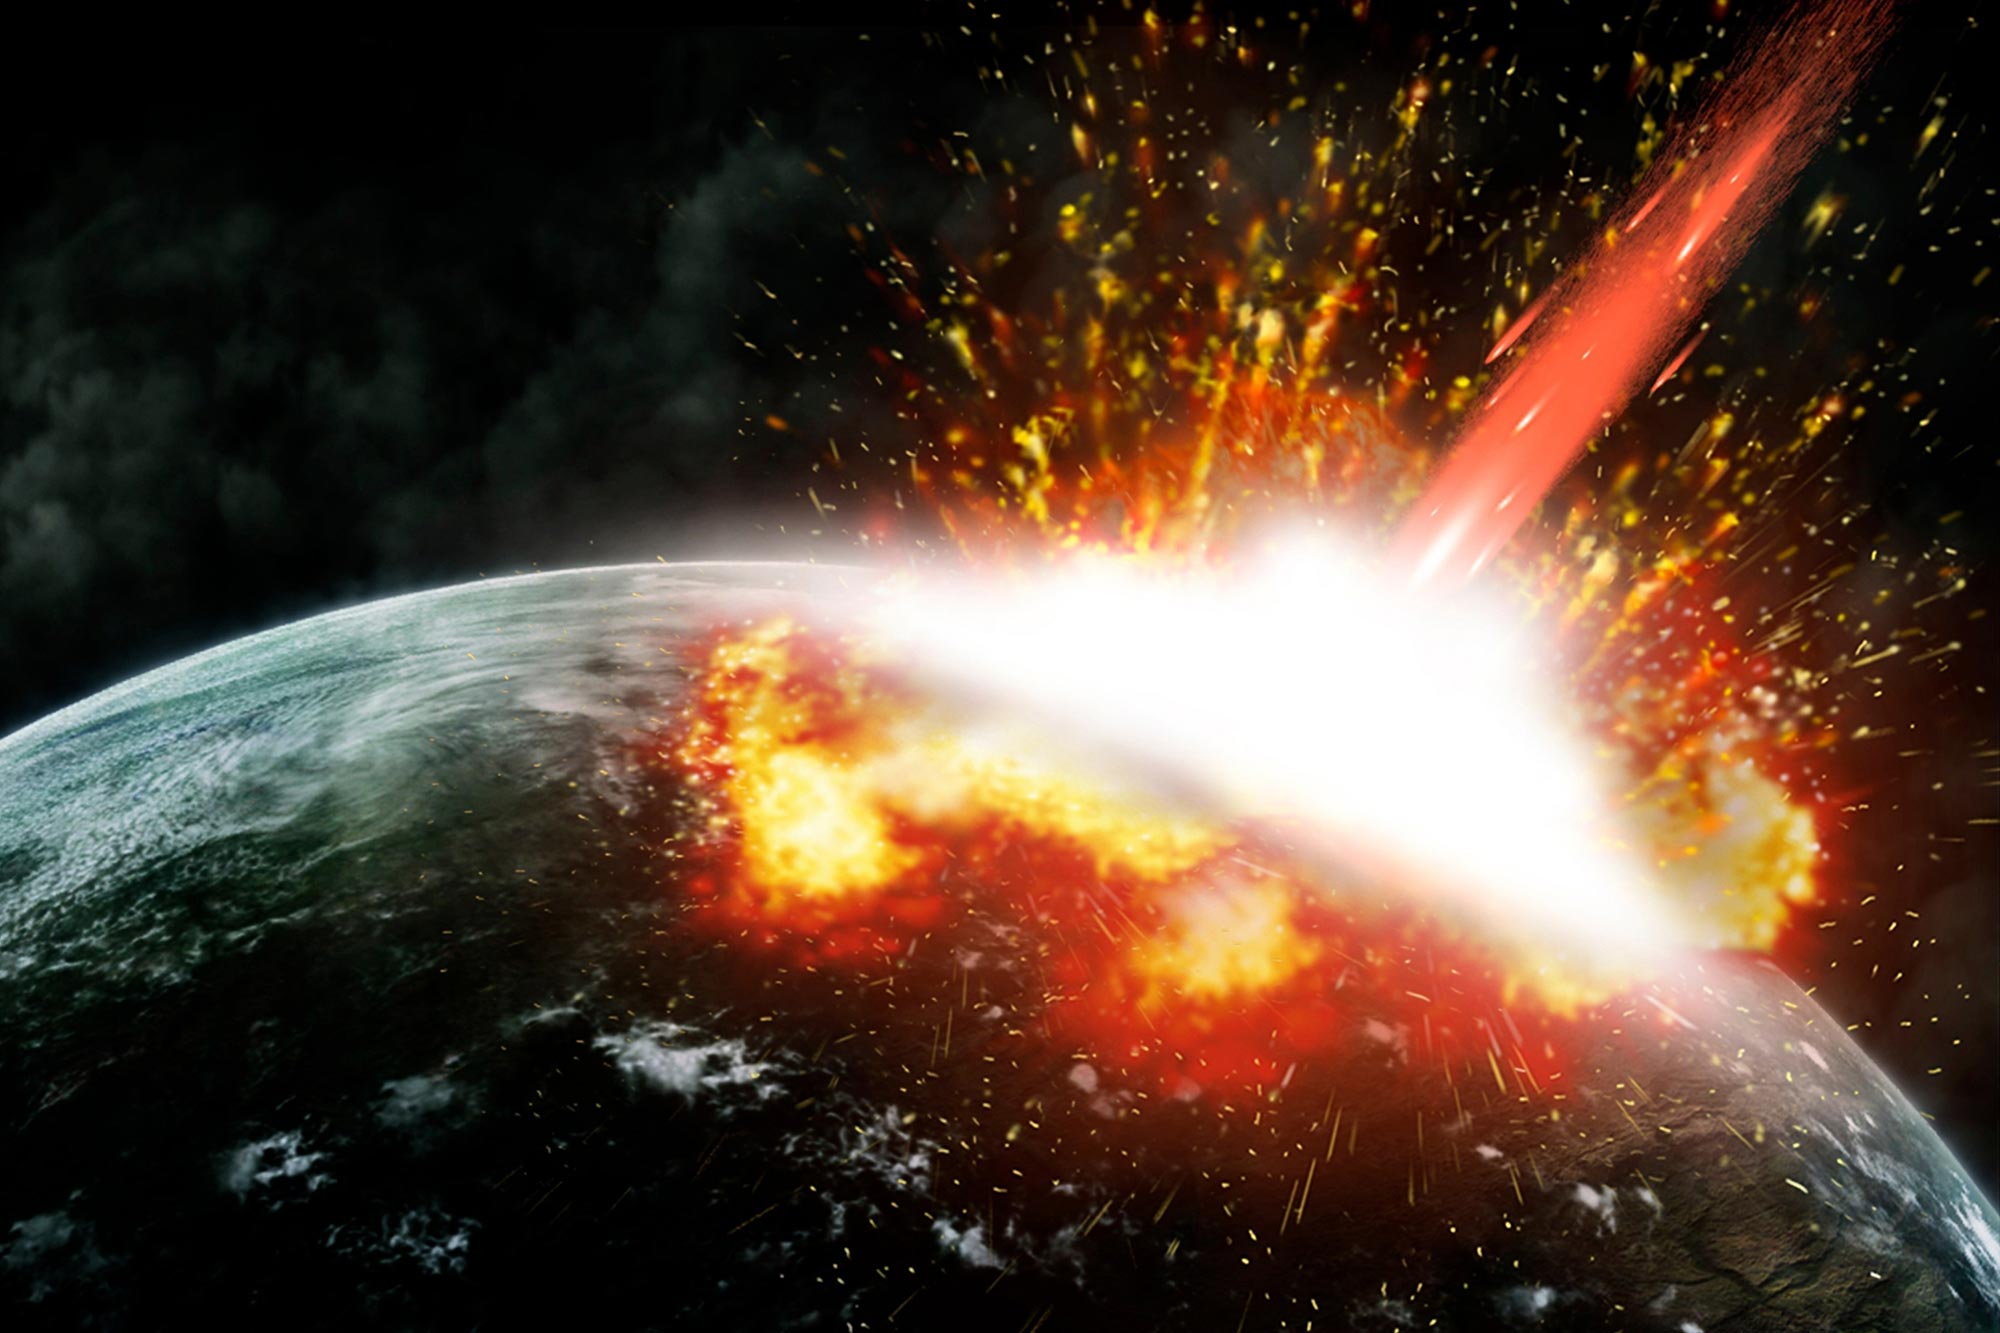 New Evidence That Giant Asteroid Impacts Created the Continents - SciTechDaily